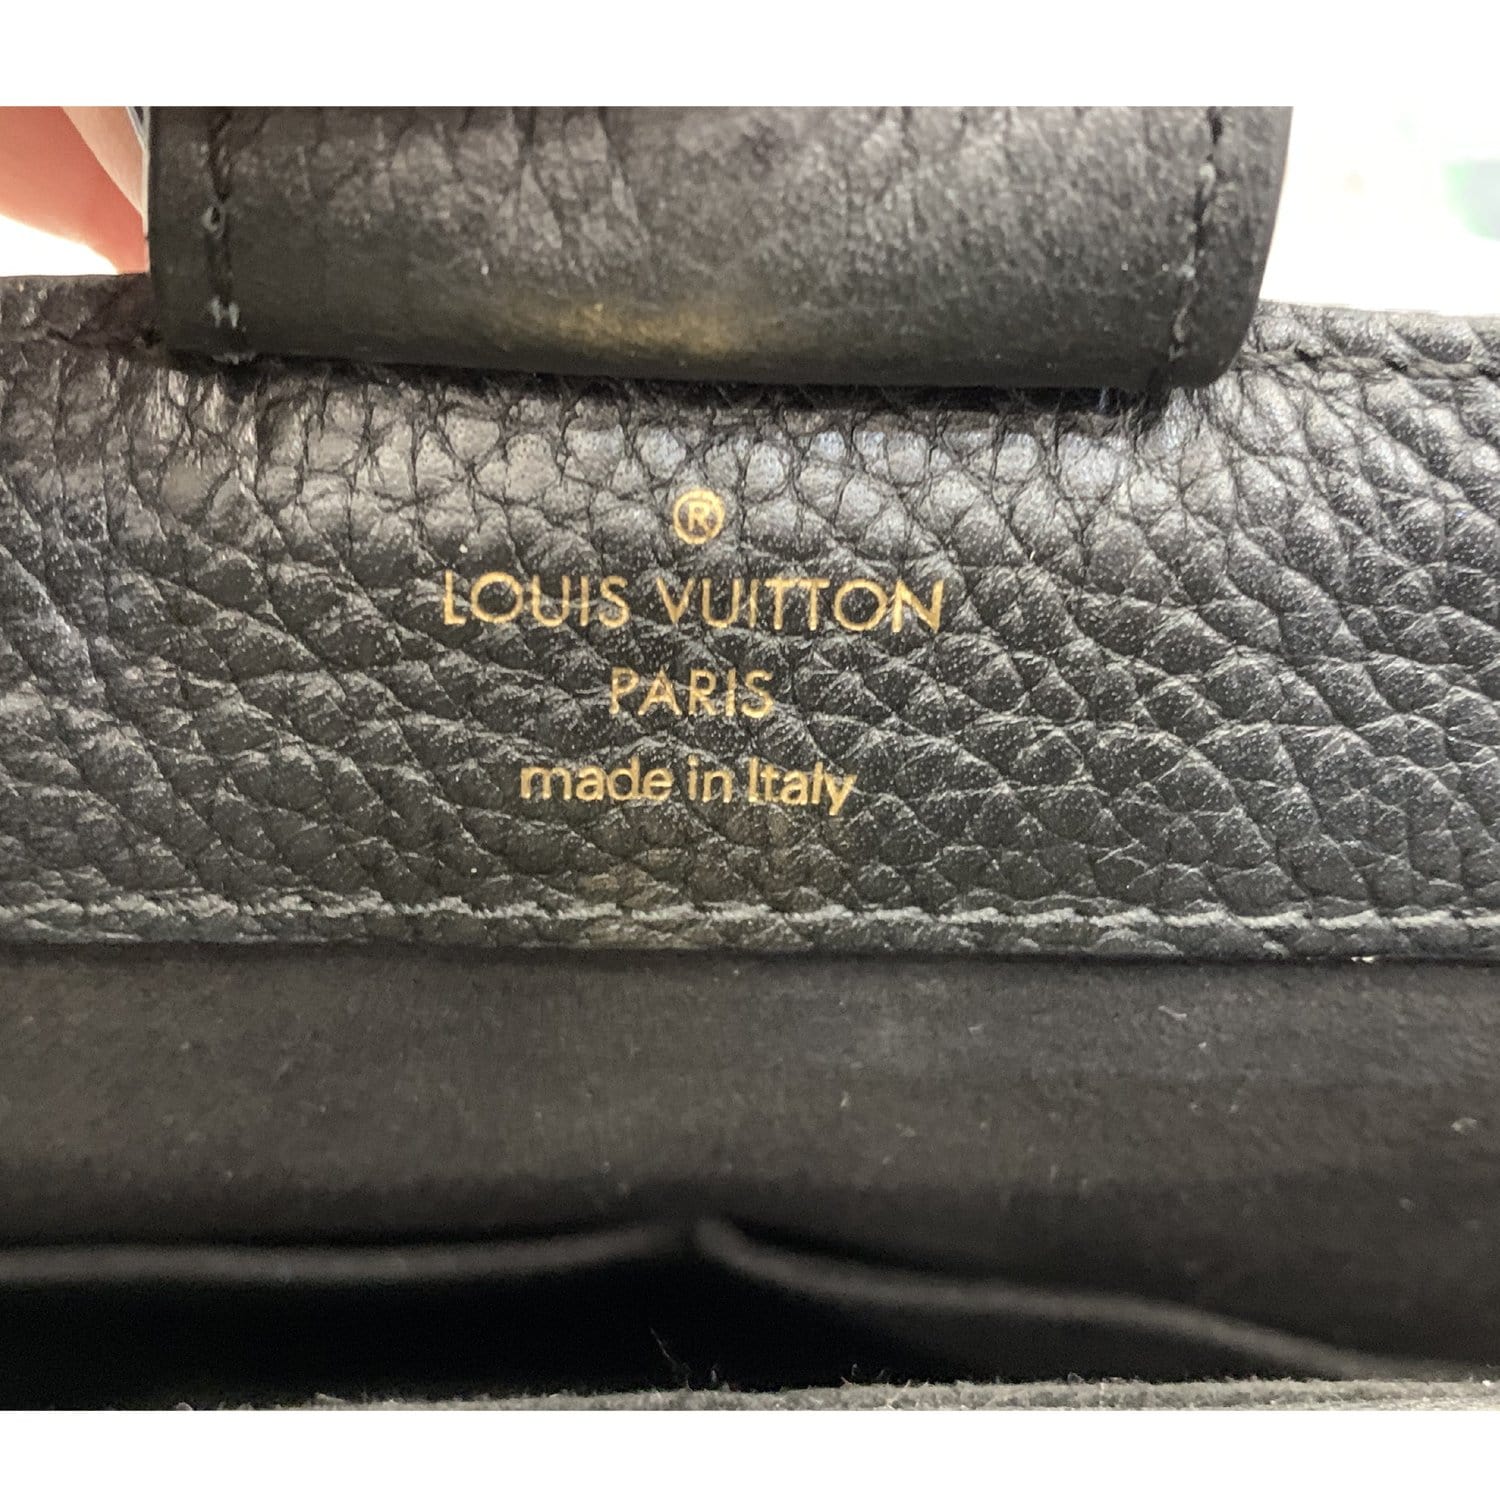 Louis Vuitton Brittany in Damier Ebene and Noir Cuir Taurillon - SOLD